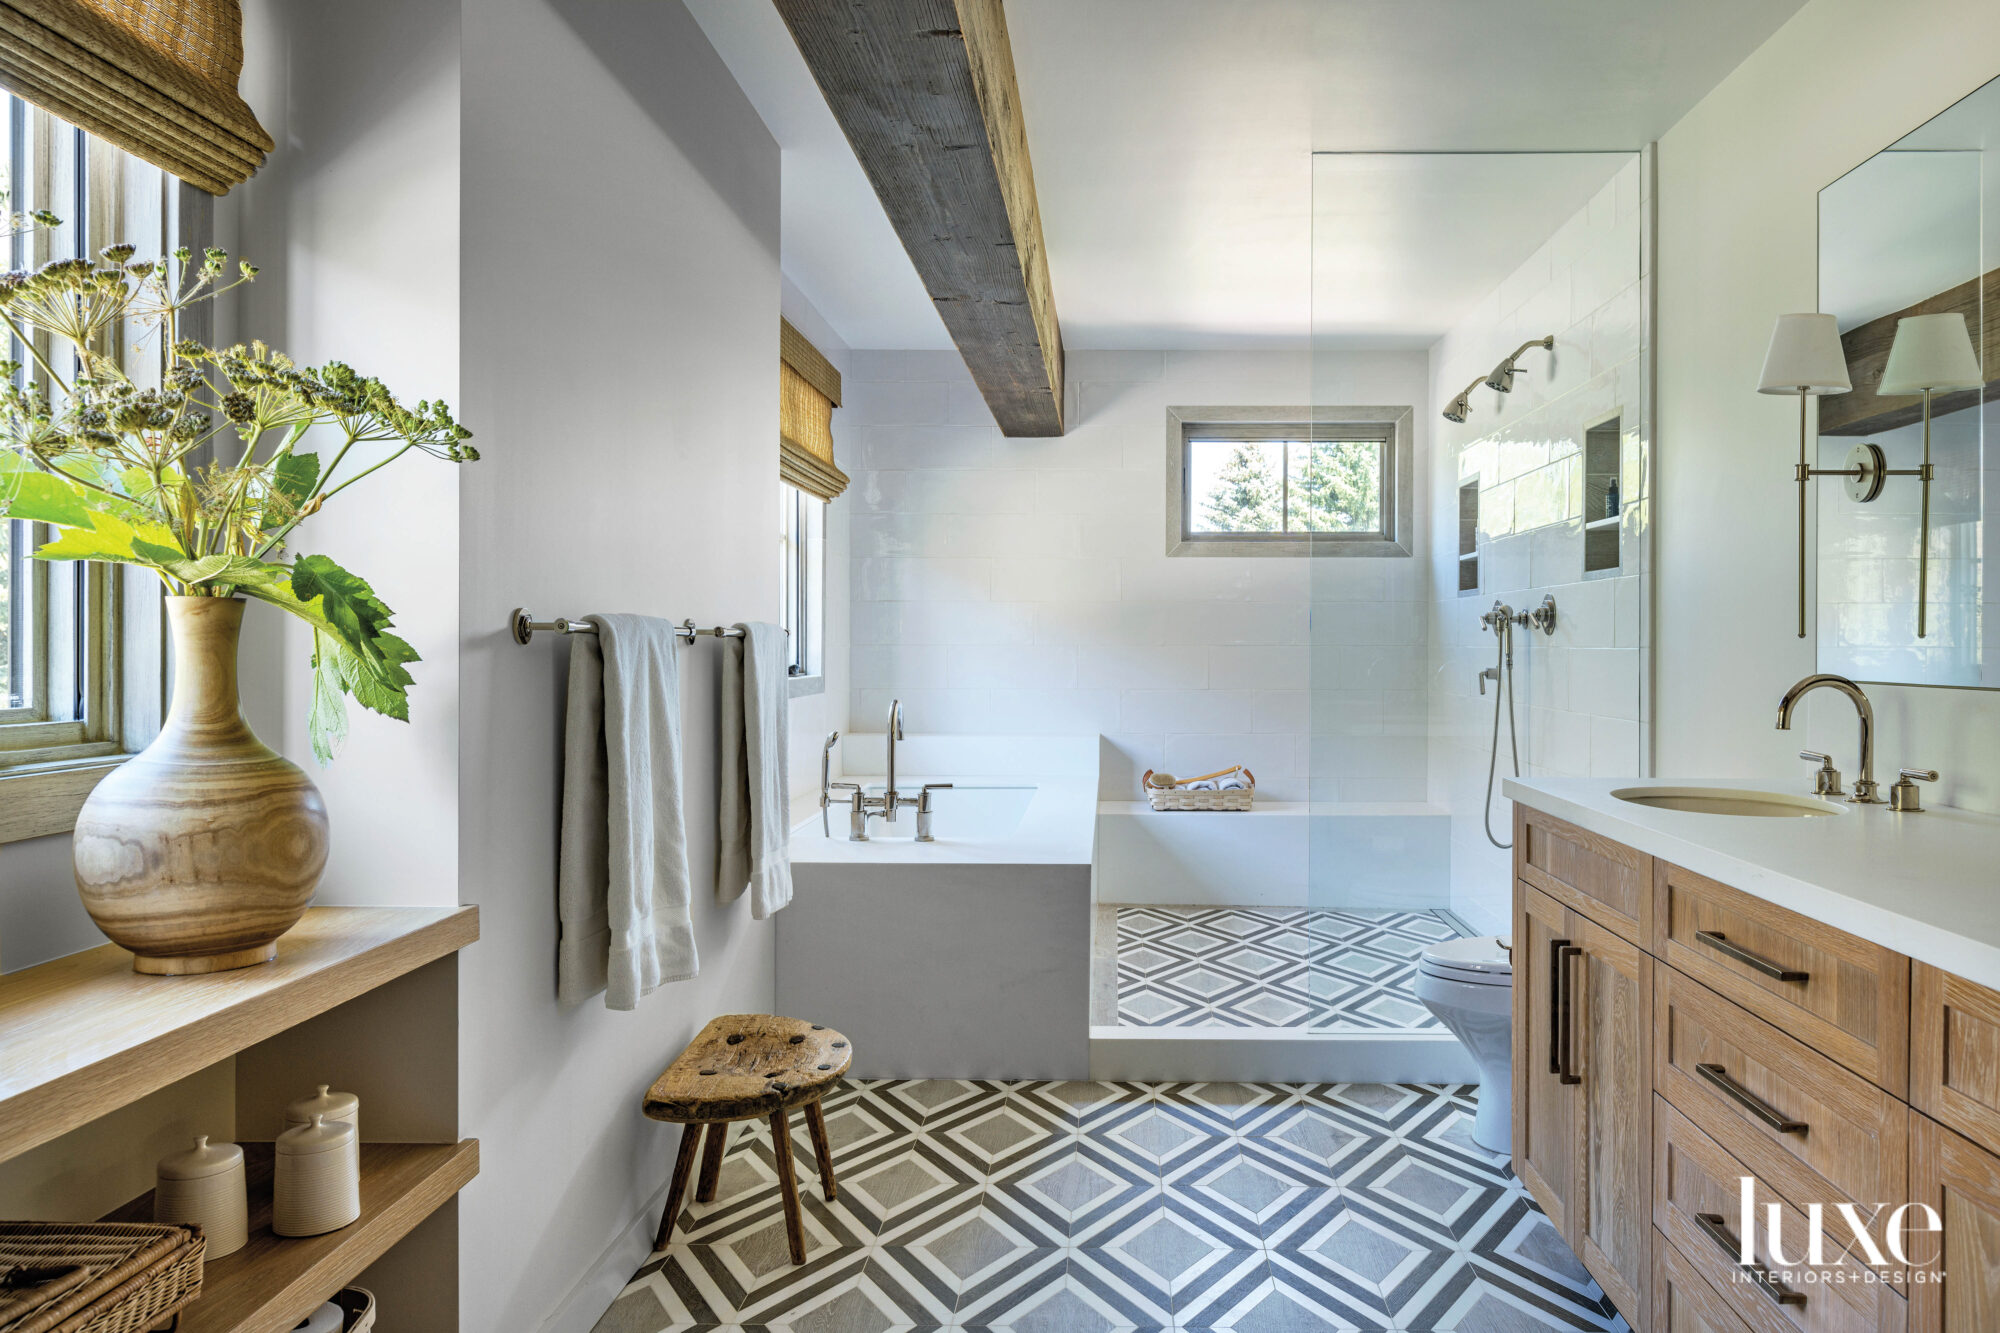 Main bathroom with walk in shower and geometric pattern floor tile